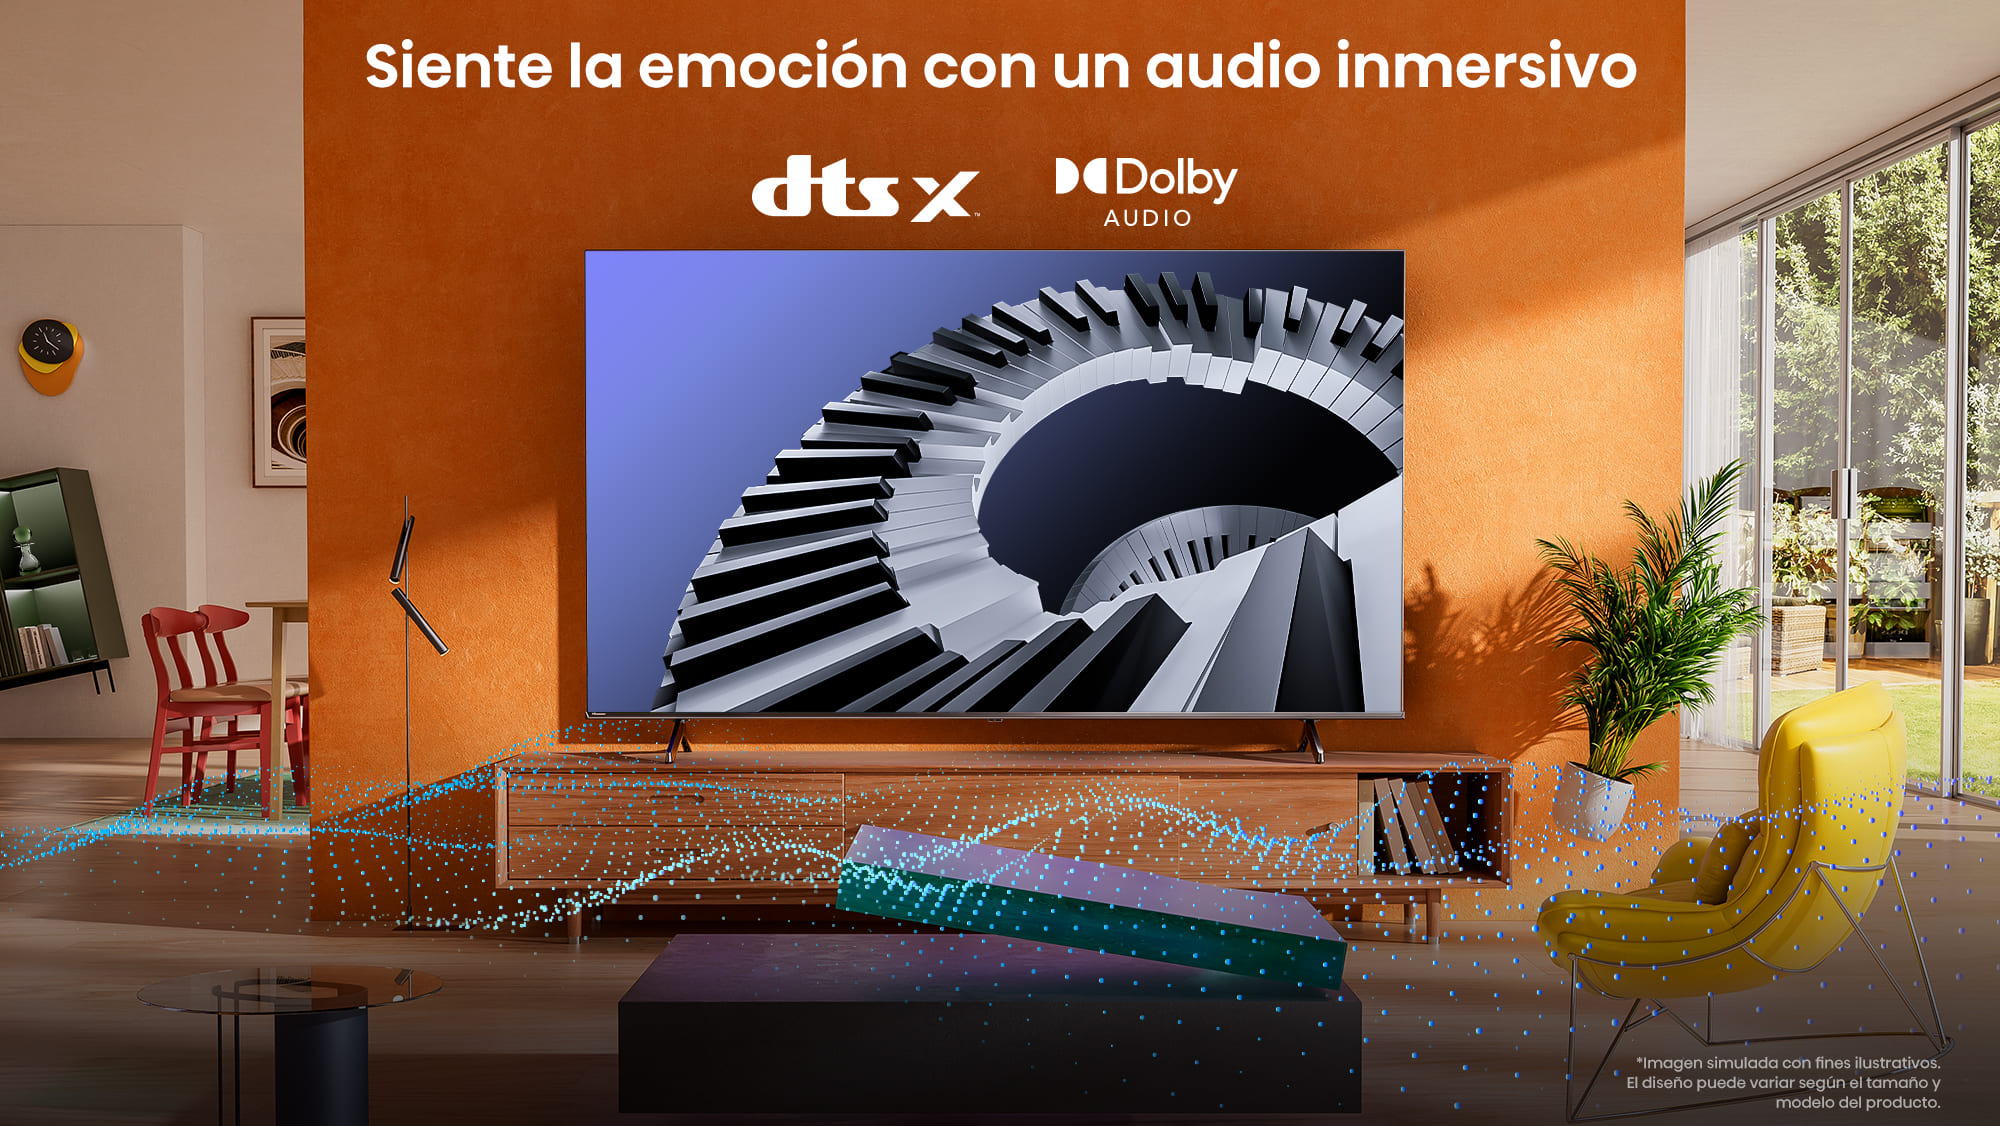 DTS X & Dolby Audio